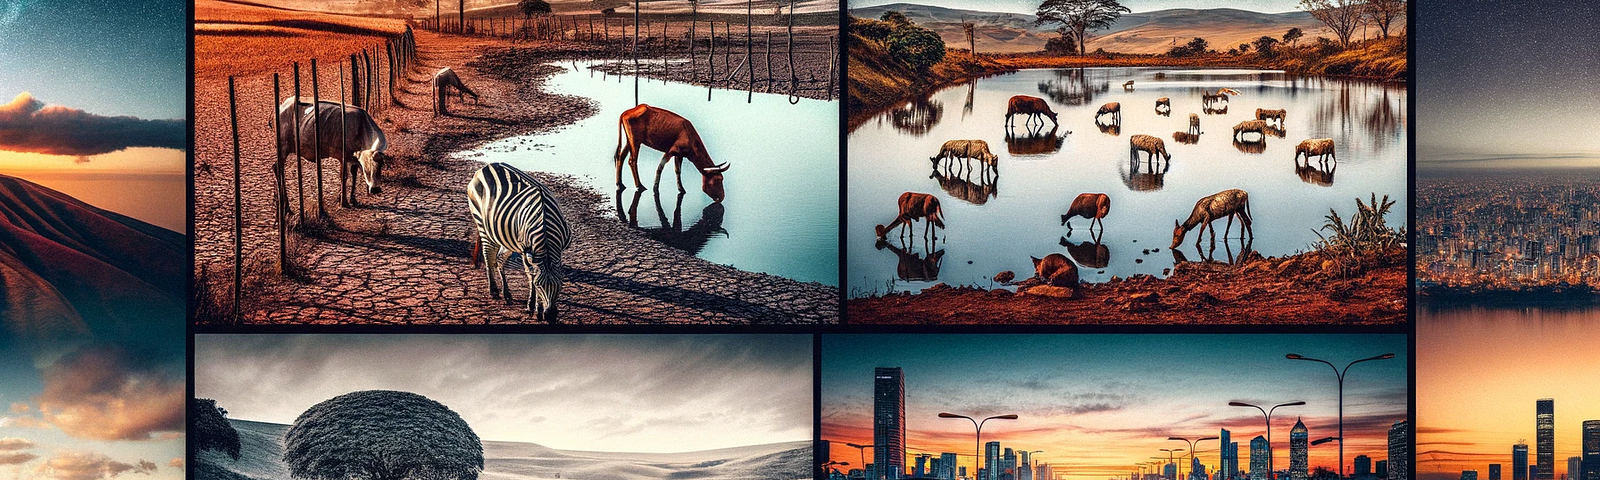 Image block created by the Editor via DALL-E 3:. Contrast between arid rural life and the serenity of full lagoons, green grass, and frogs in the ponds, and urban indifference. Scenes capturing the resilience and tranquillity of the countryside, contrasting with the hustle and bustle of the city.